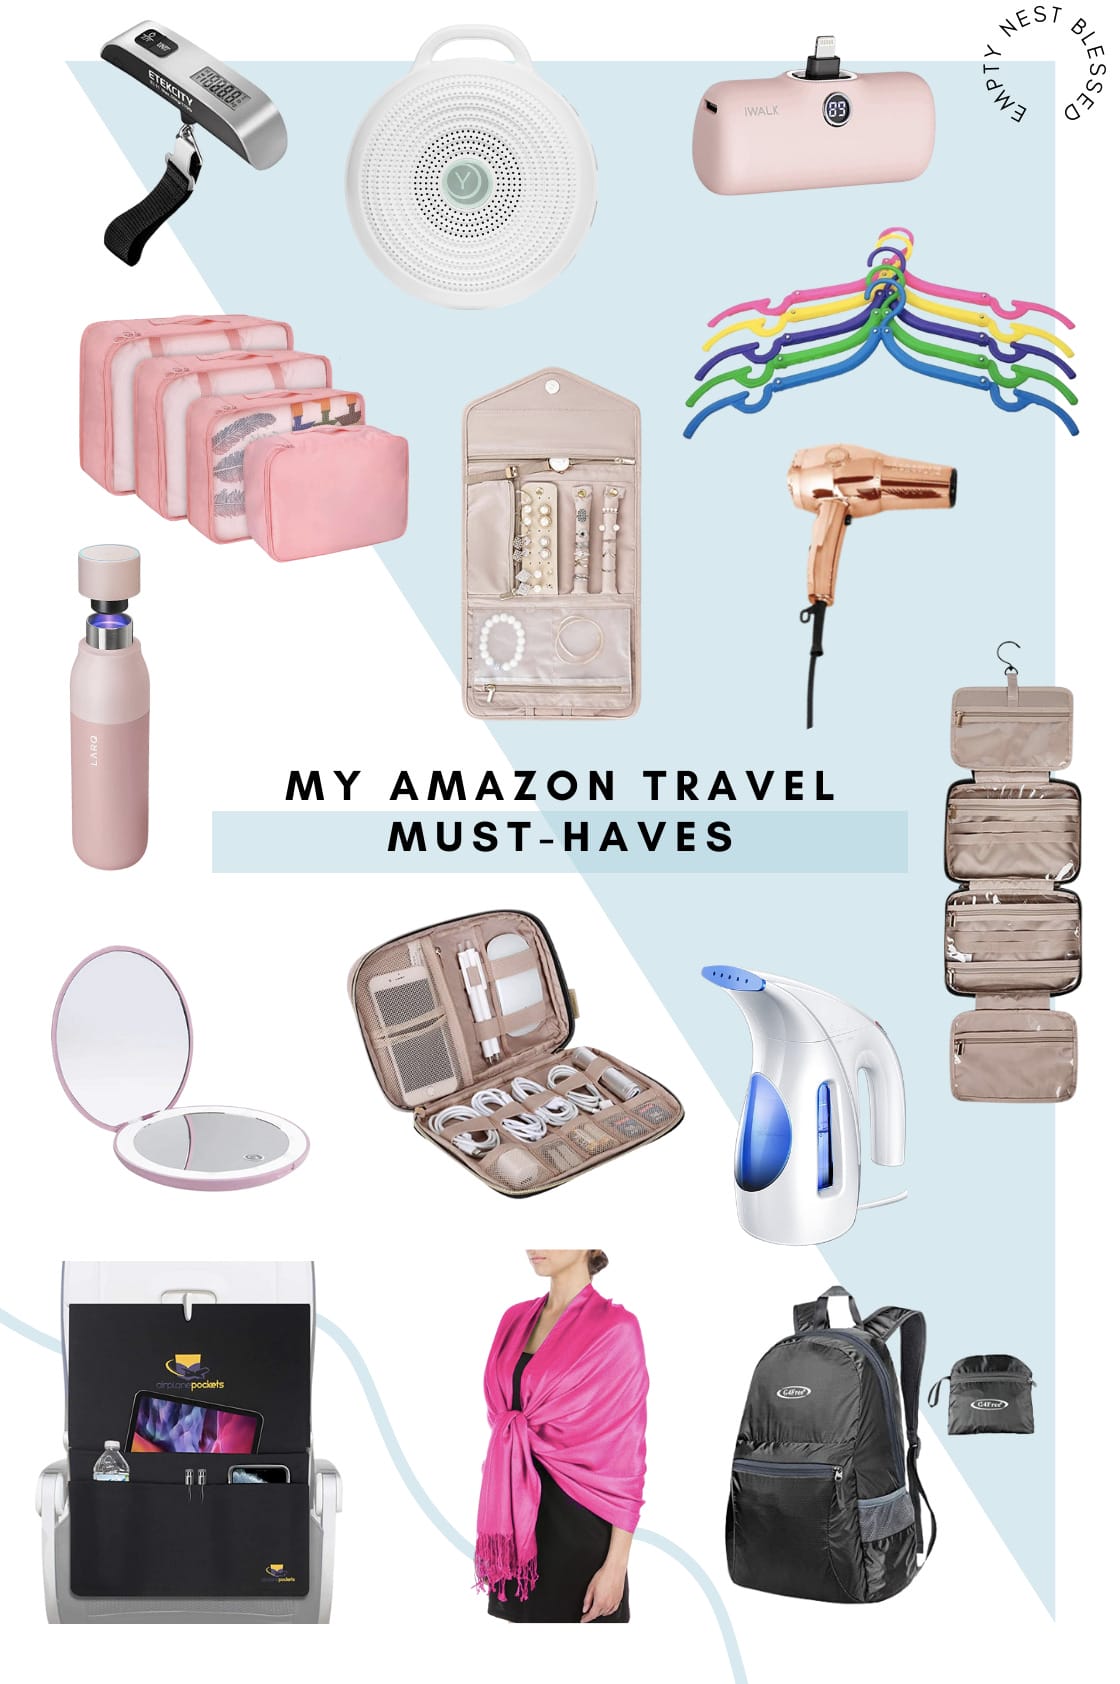 My Amazon Travel MustHaves & Why I Love Them